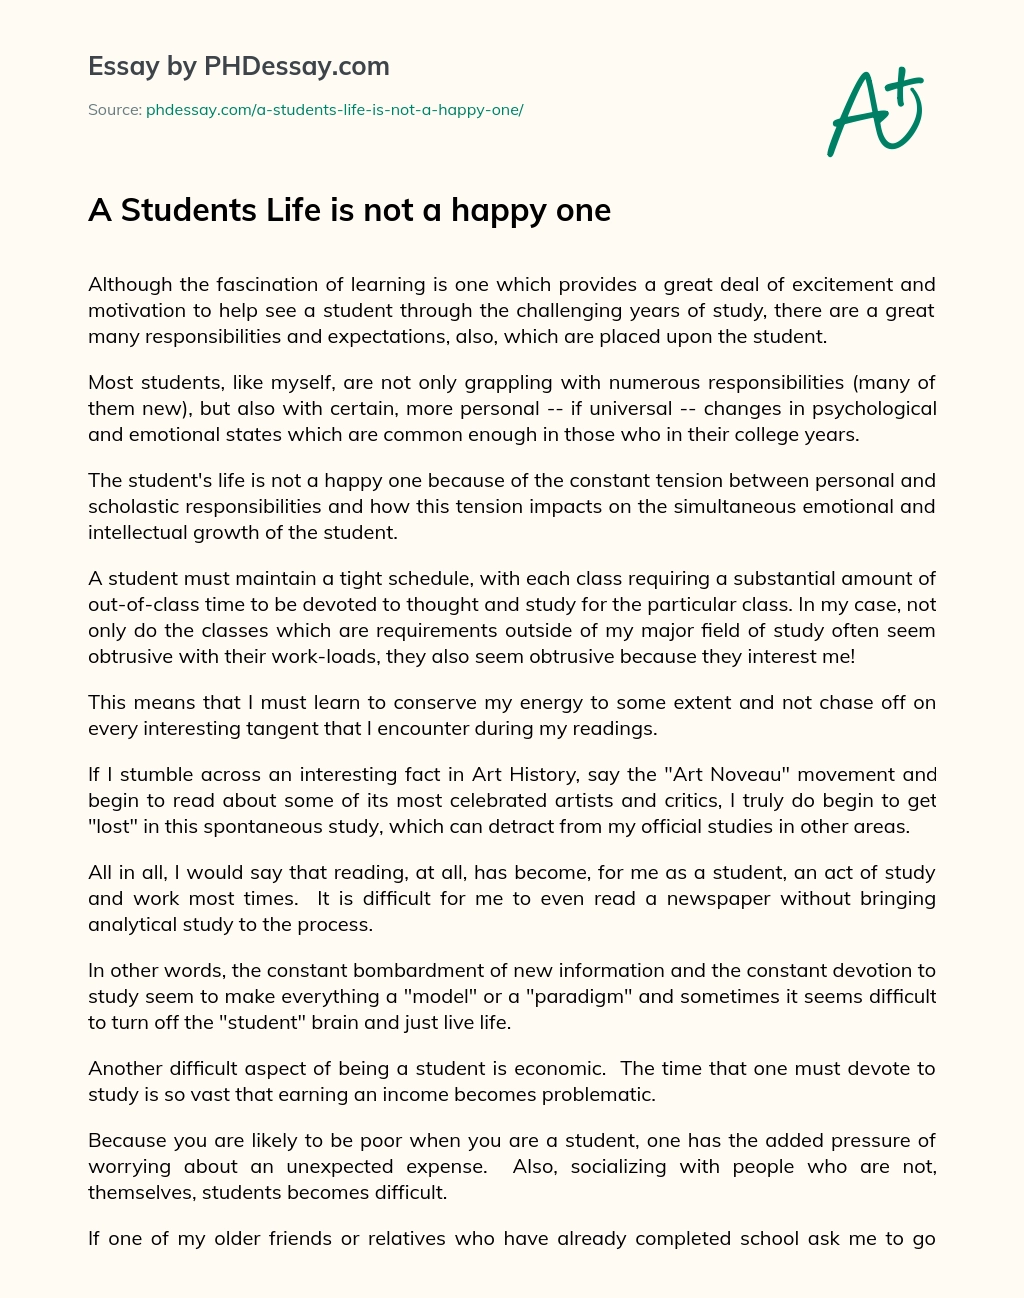 A Students Life is not a happy one essay